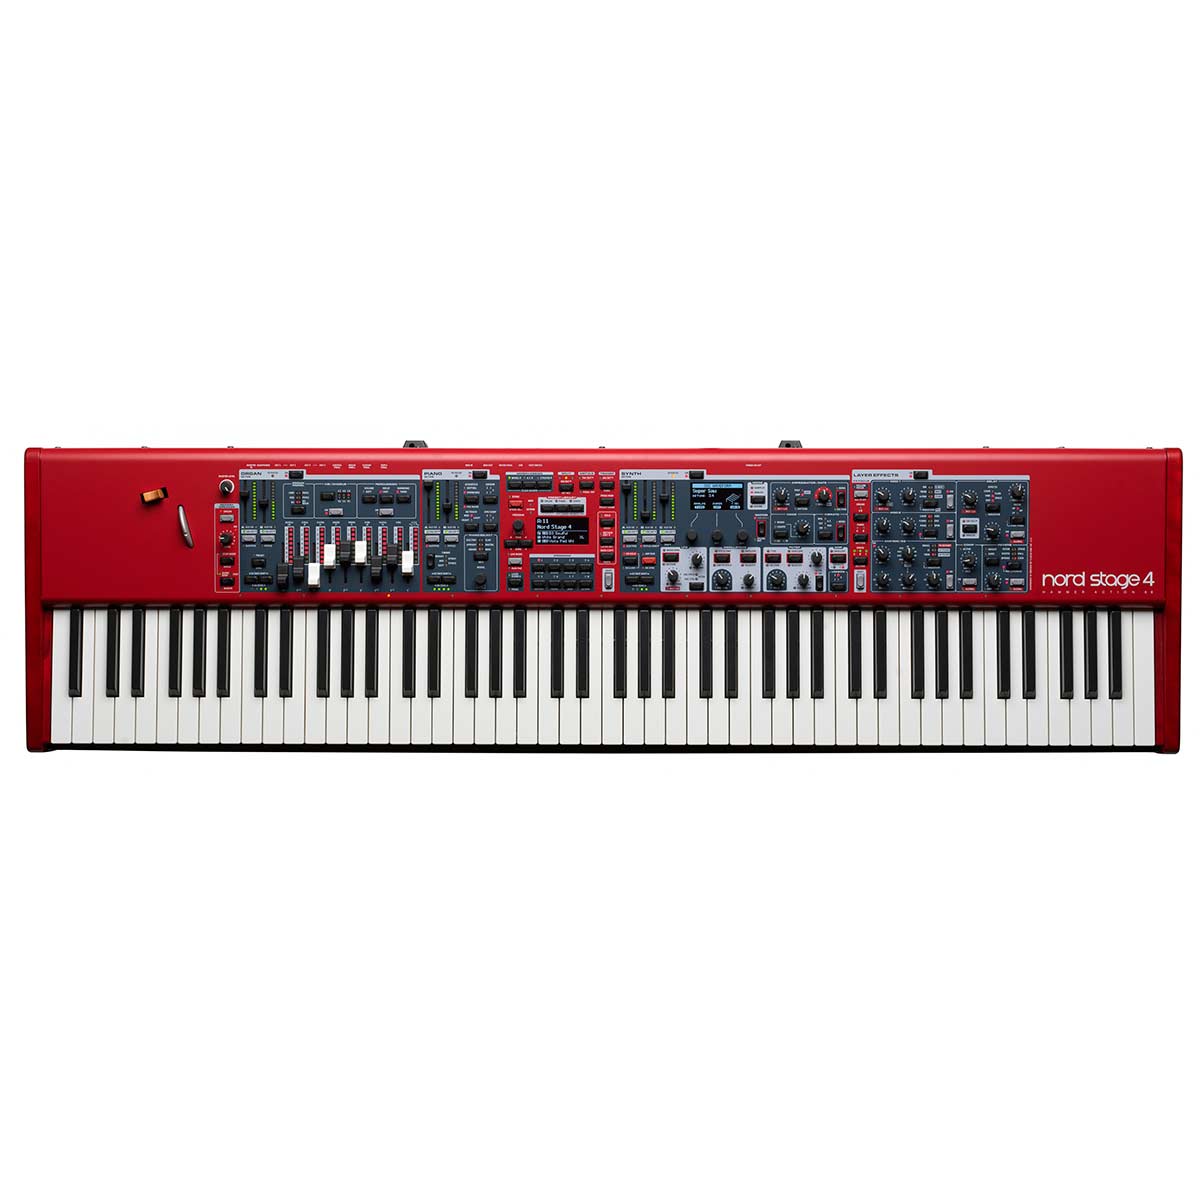 Piano digital Clavia Nord Stage 4 88